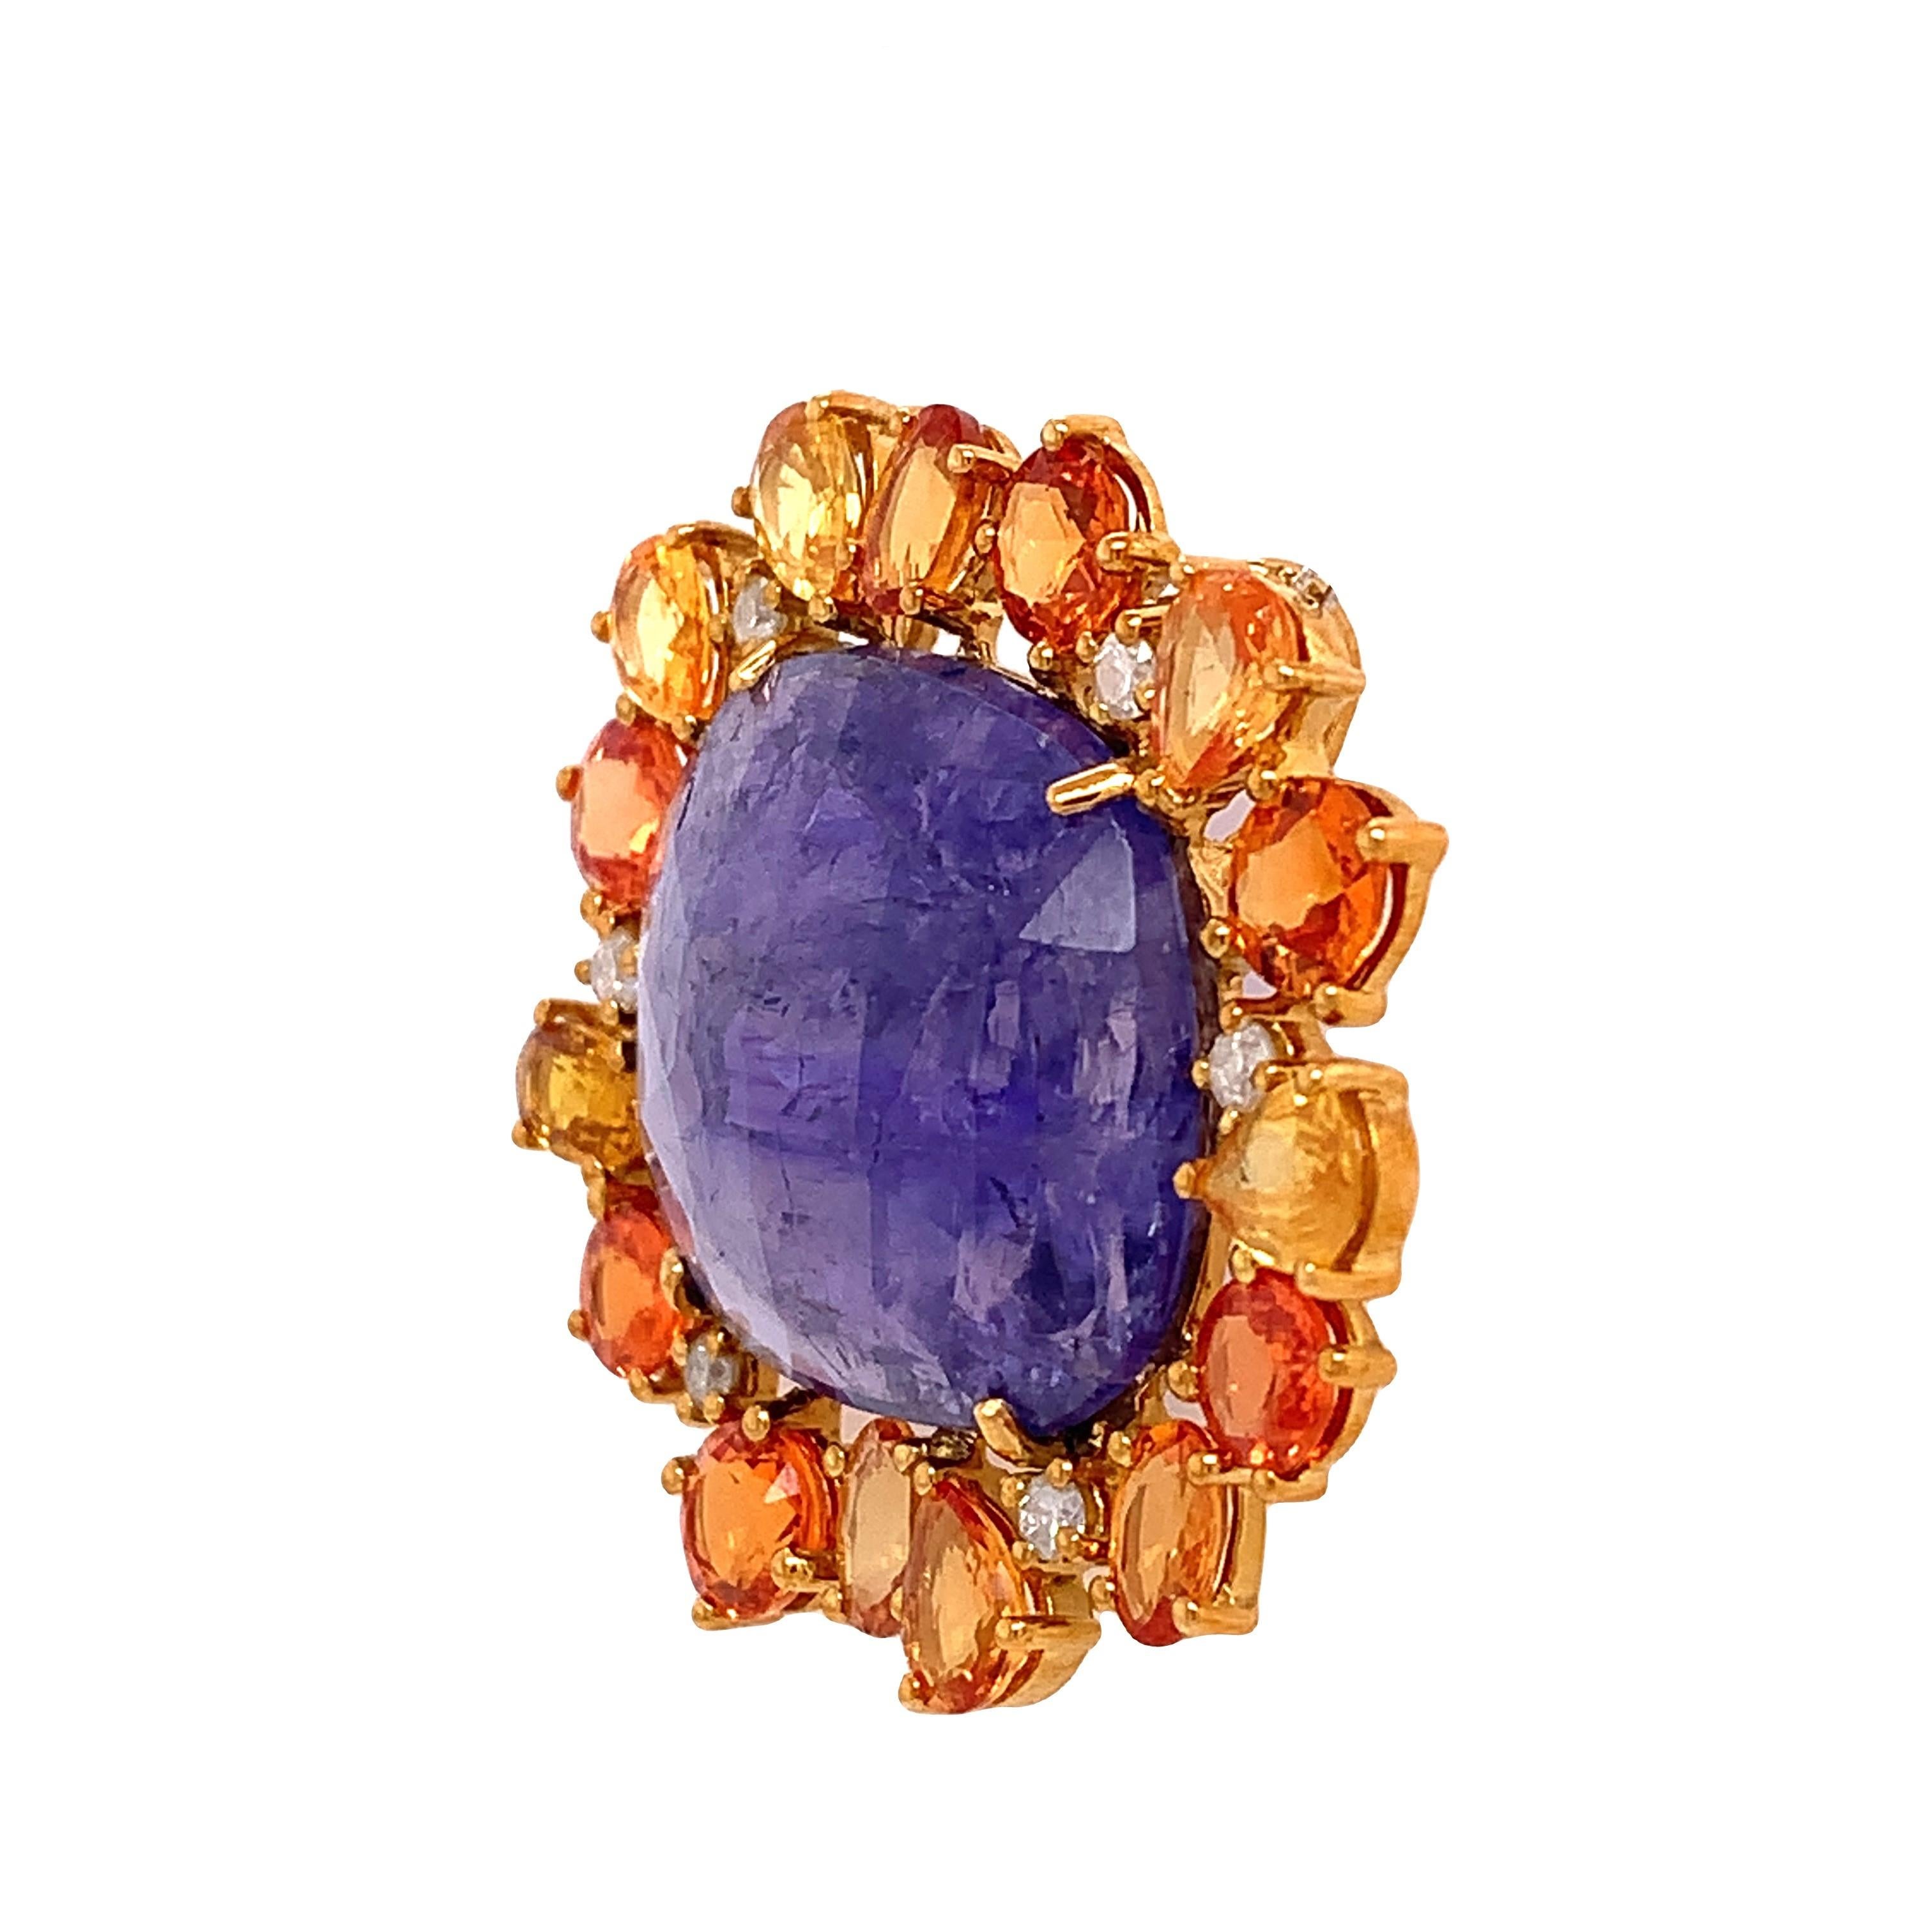 Lillipad Collection

This gorgeous pendant features a 15.87ct rose cut Tanzanite center stone and a slightly gradient color of orange sapphire accent stones. It is set in 18k yellow gold. This pendant can be a wonderful gift for the one you